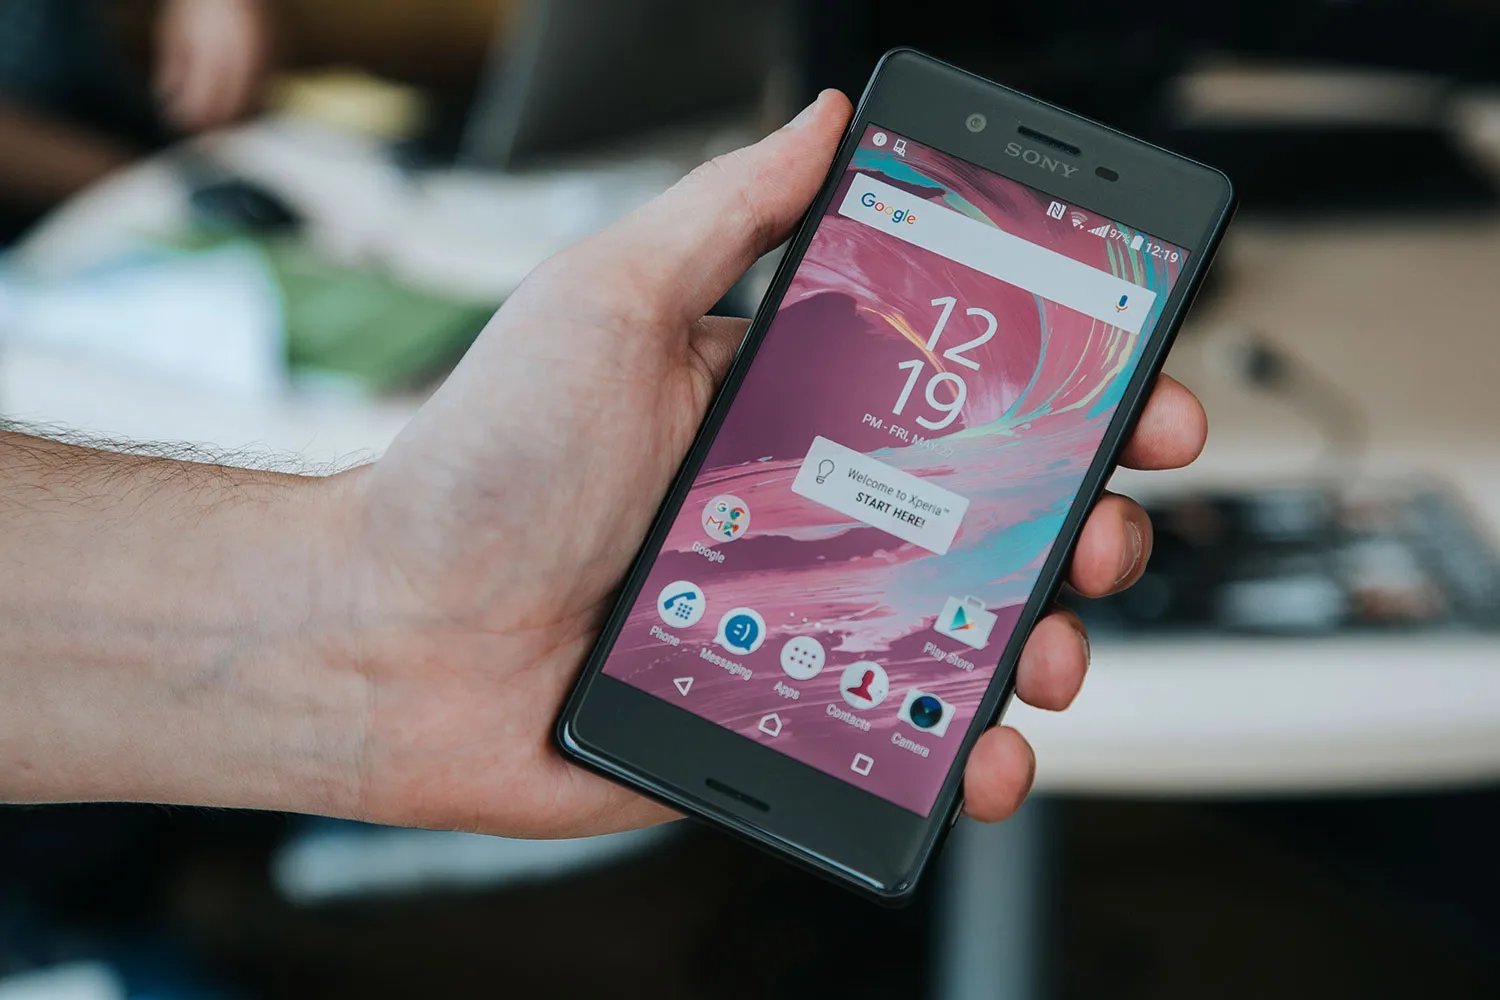 Upgrading To Android 8 On Sony Xperia: A How-To Guide